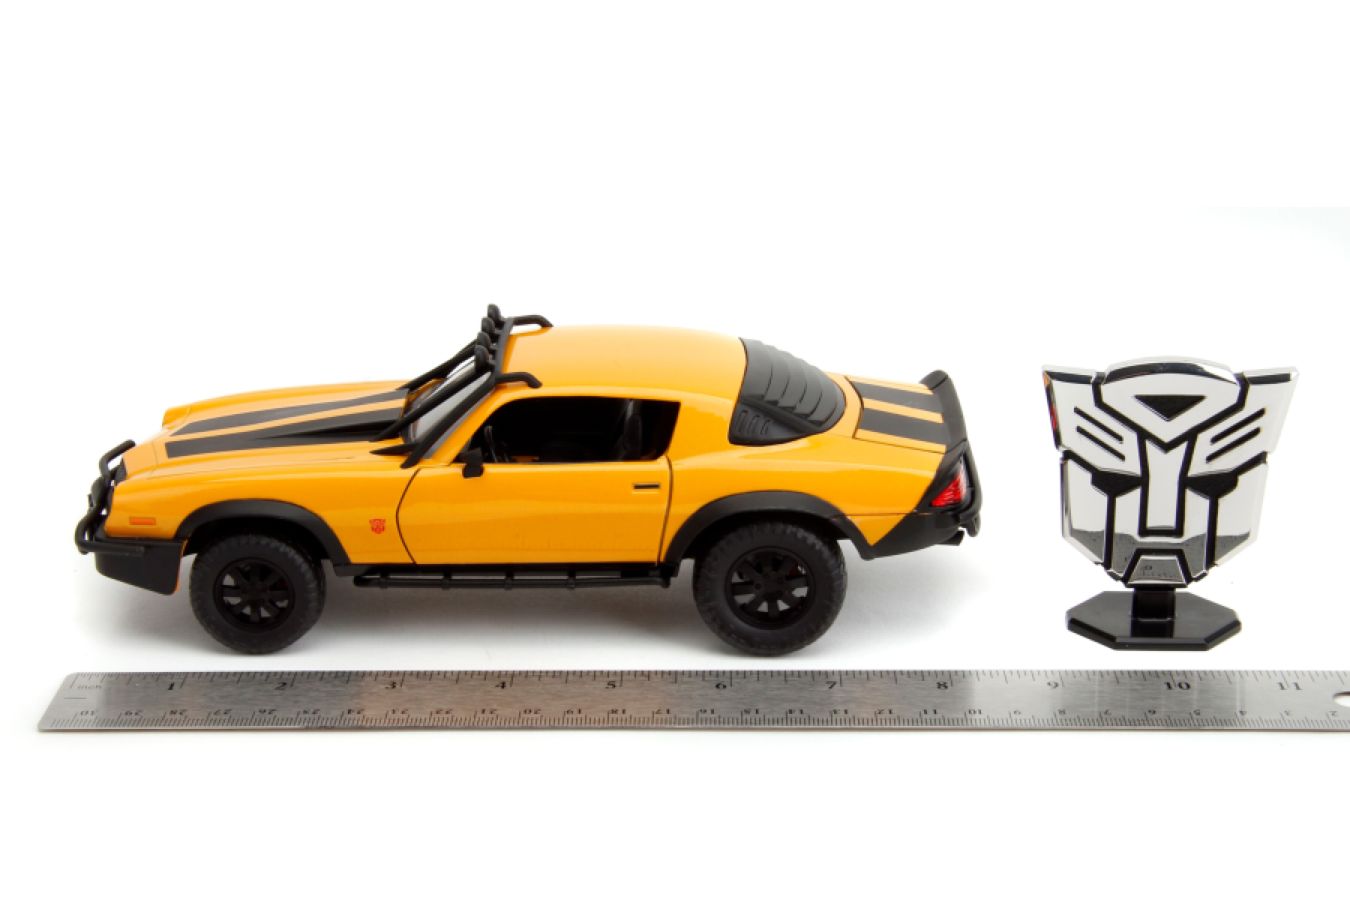 Transformers: Rise of the Beasts - 1977 Chevrolet Camaro 1:24 Scale Vehicle